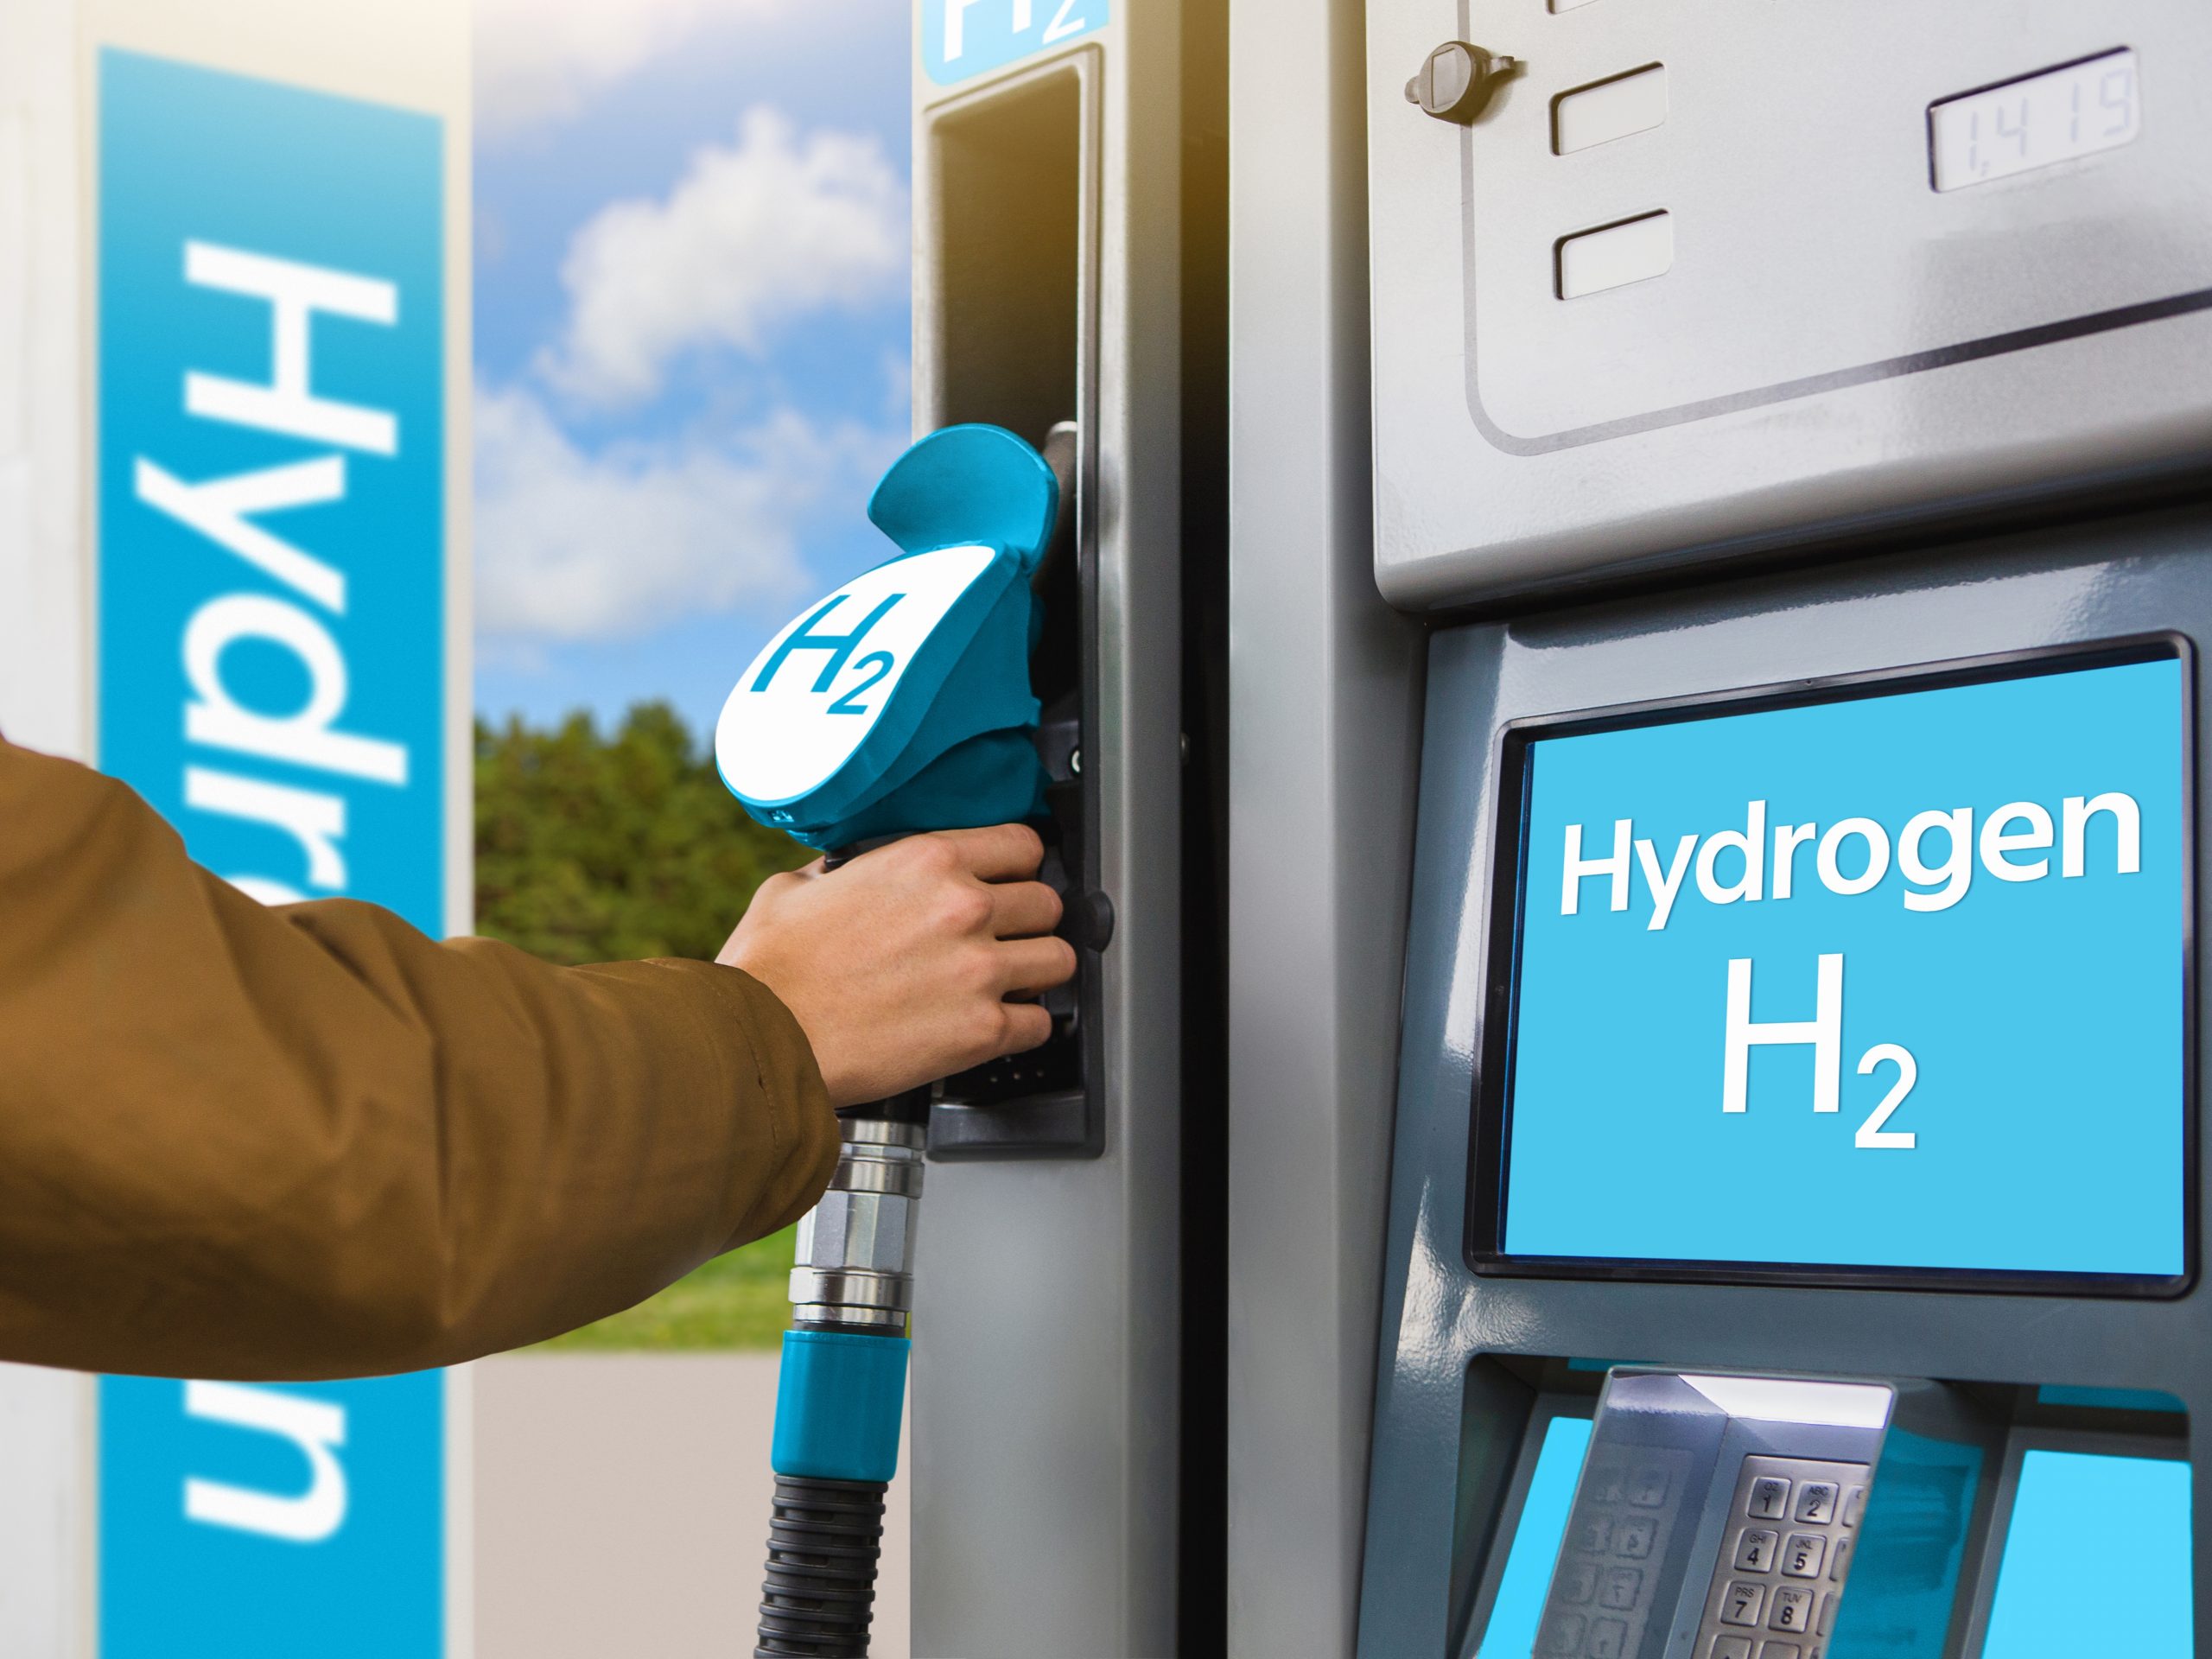 The governments of Australia’s eastern-seaboard states have co-signed an MoU to develop hydrogen refuelling infrastructure for heavy trucking on major highways linking Victoria, NSW and Queensland.